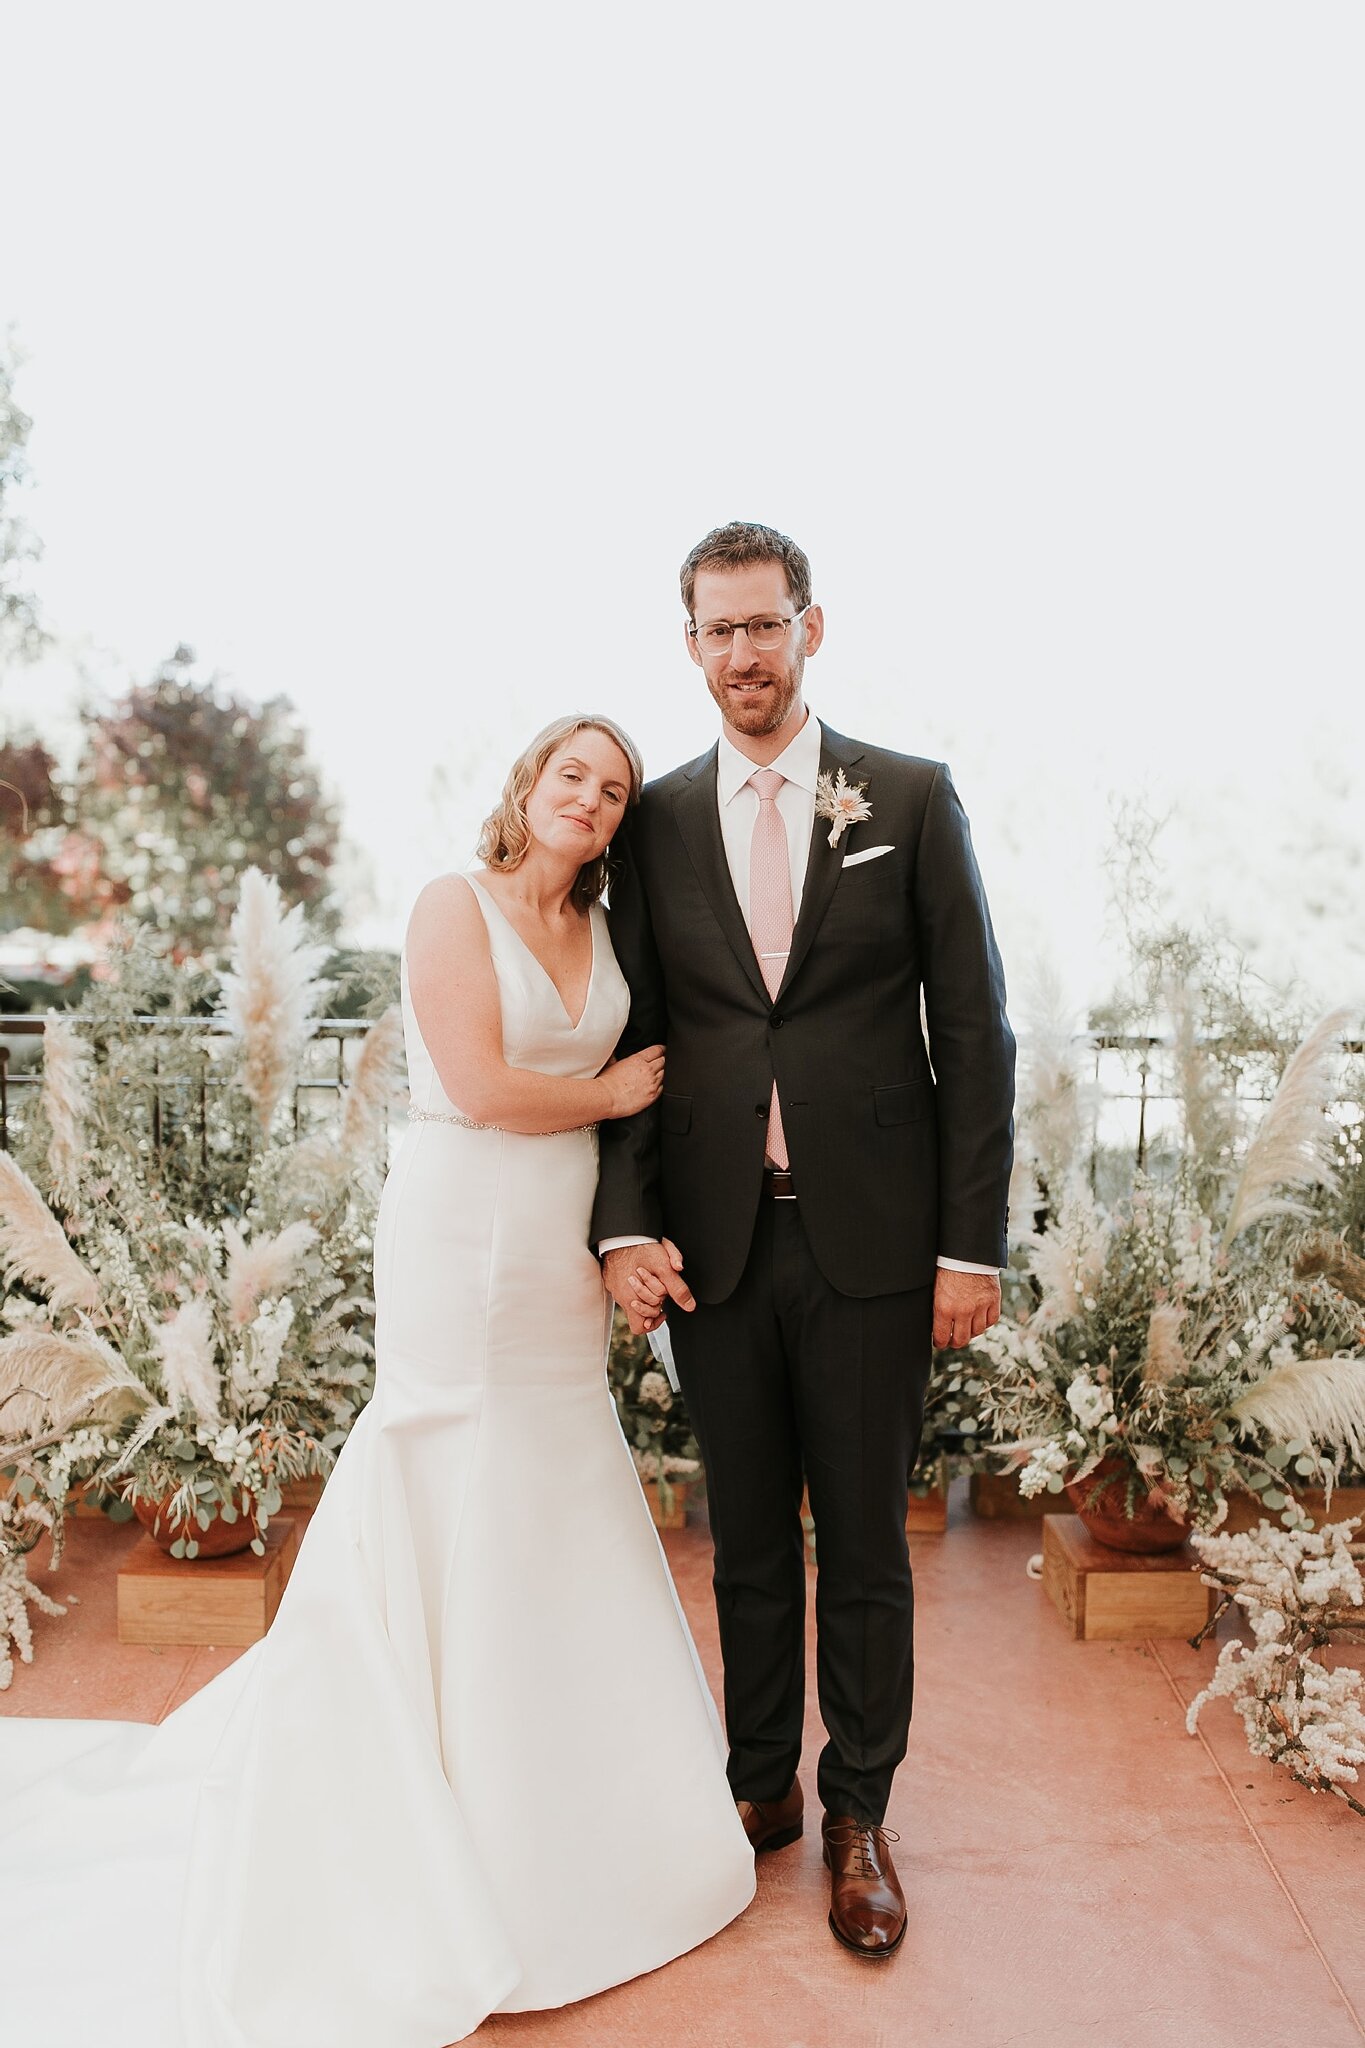 Alicia+lucia+photography+-+albuquerque+wedding+photographer+-+santa+fe+wedding+photography+-+new+mexico+wedding+photographer+-+new+mexico+wedding+-+wedding+gowns+-+trumpet+wedding+gown+-+bridal+gowns_0021.jpg